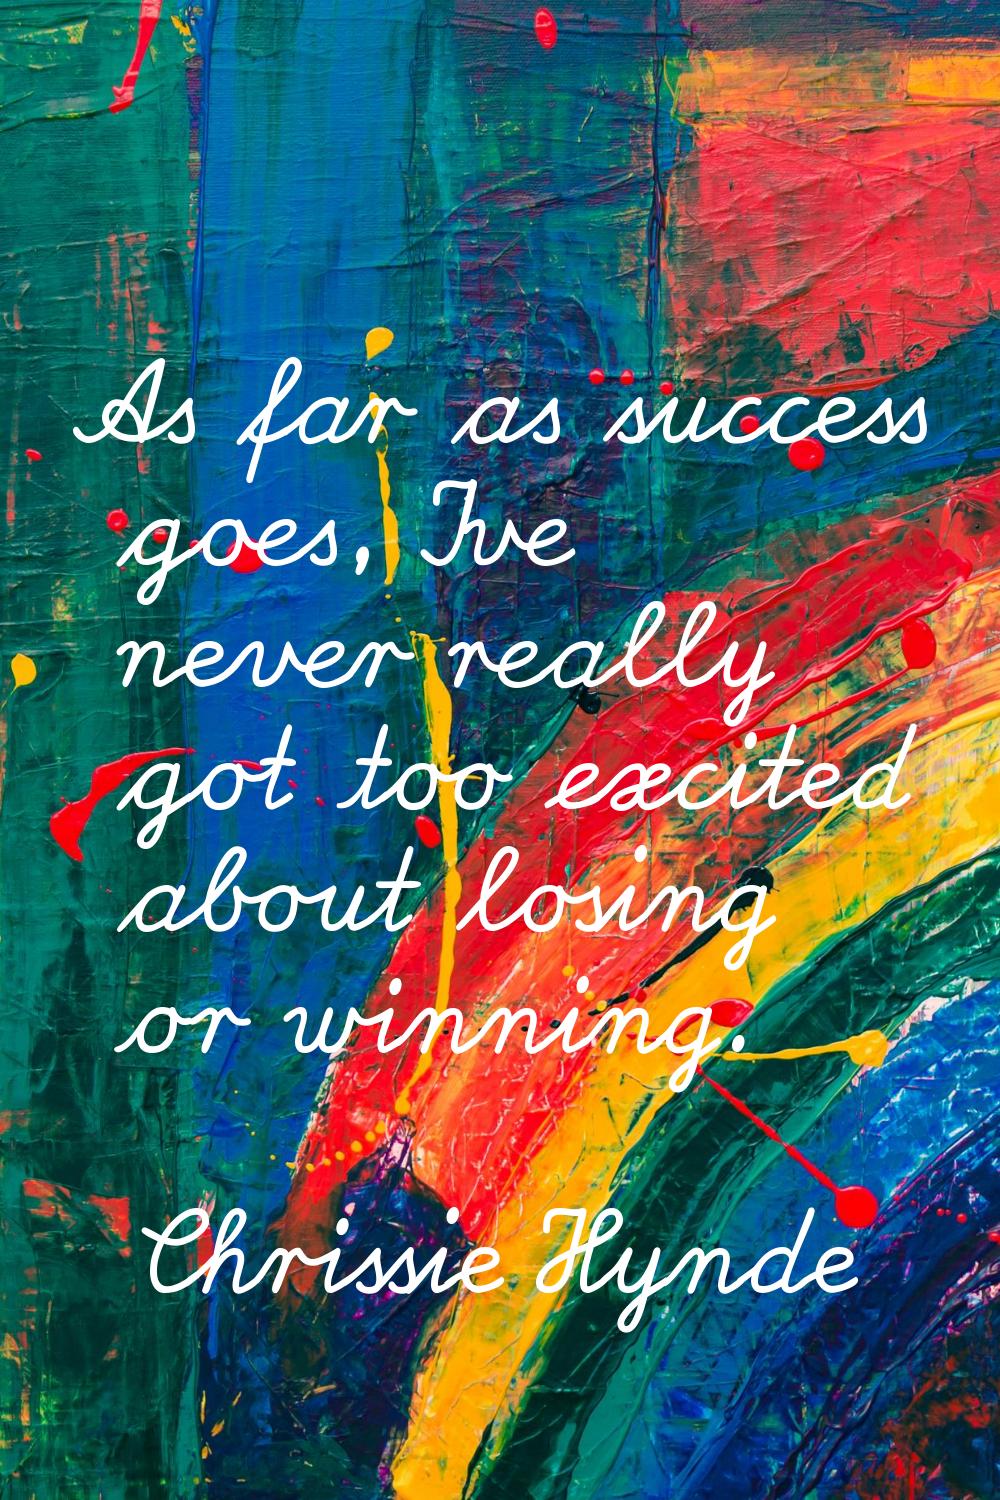 As far as success goes, I've never really got too excited about losing or winning.